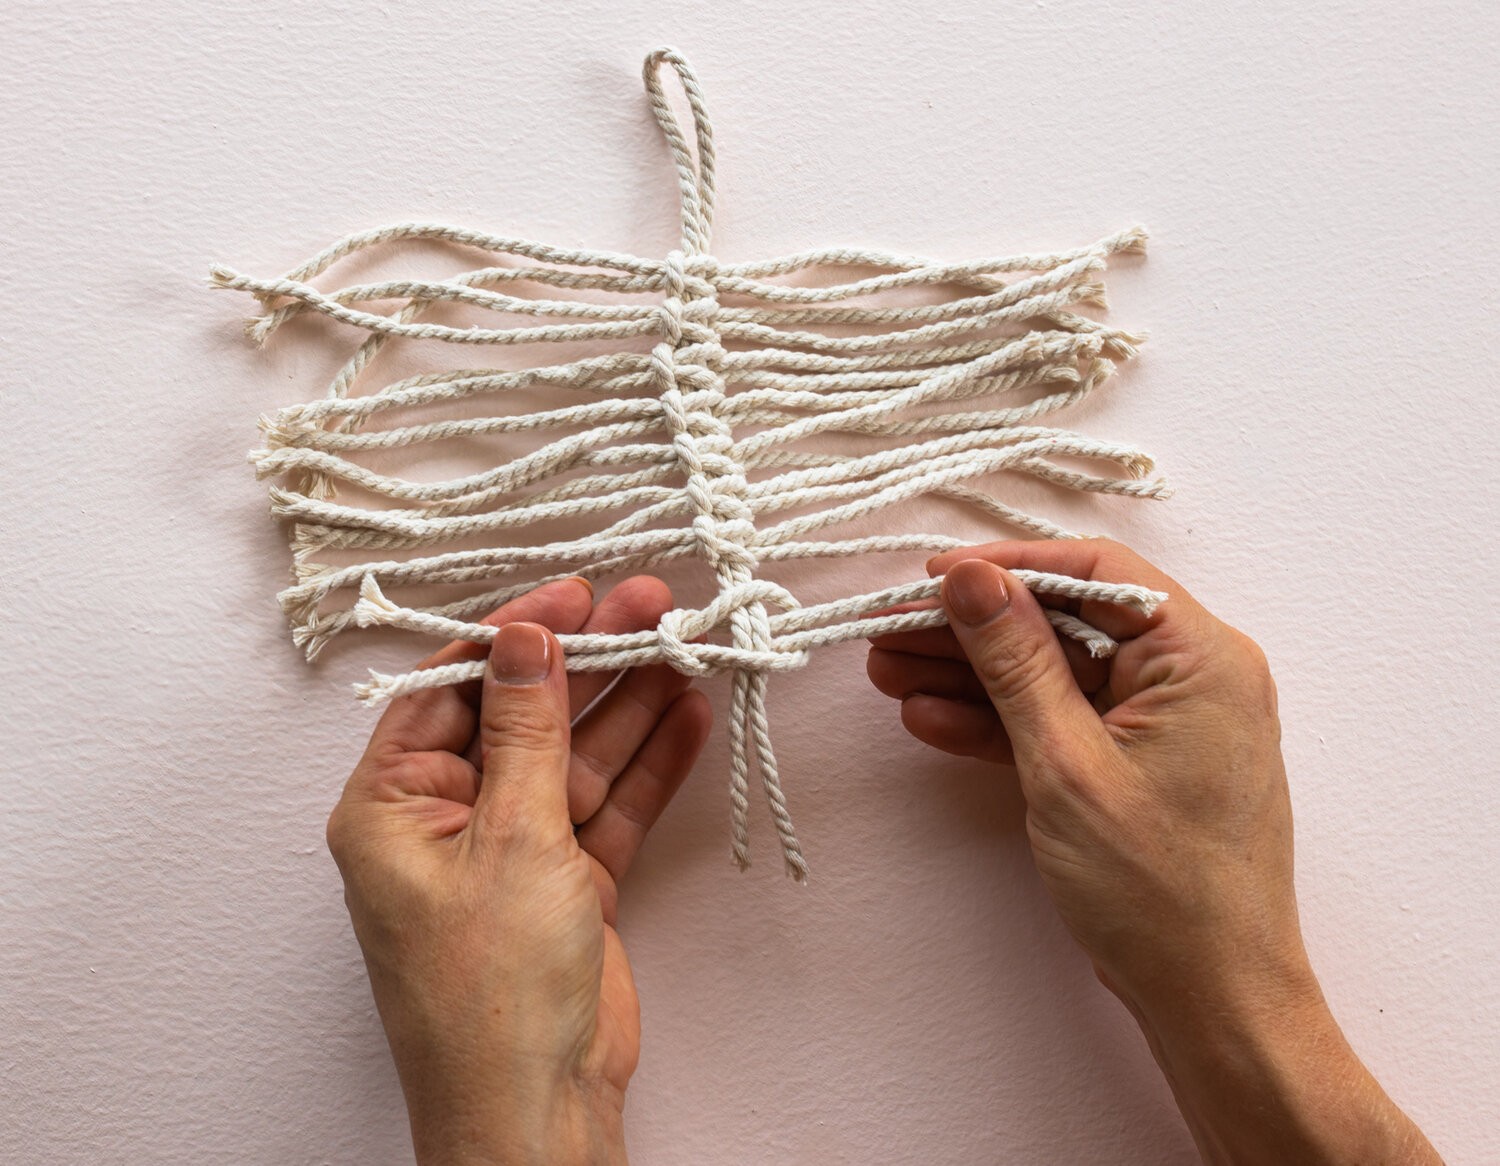 A hand ties macrame string together to make macrame leaves.